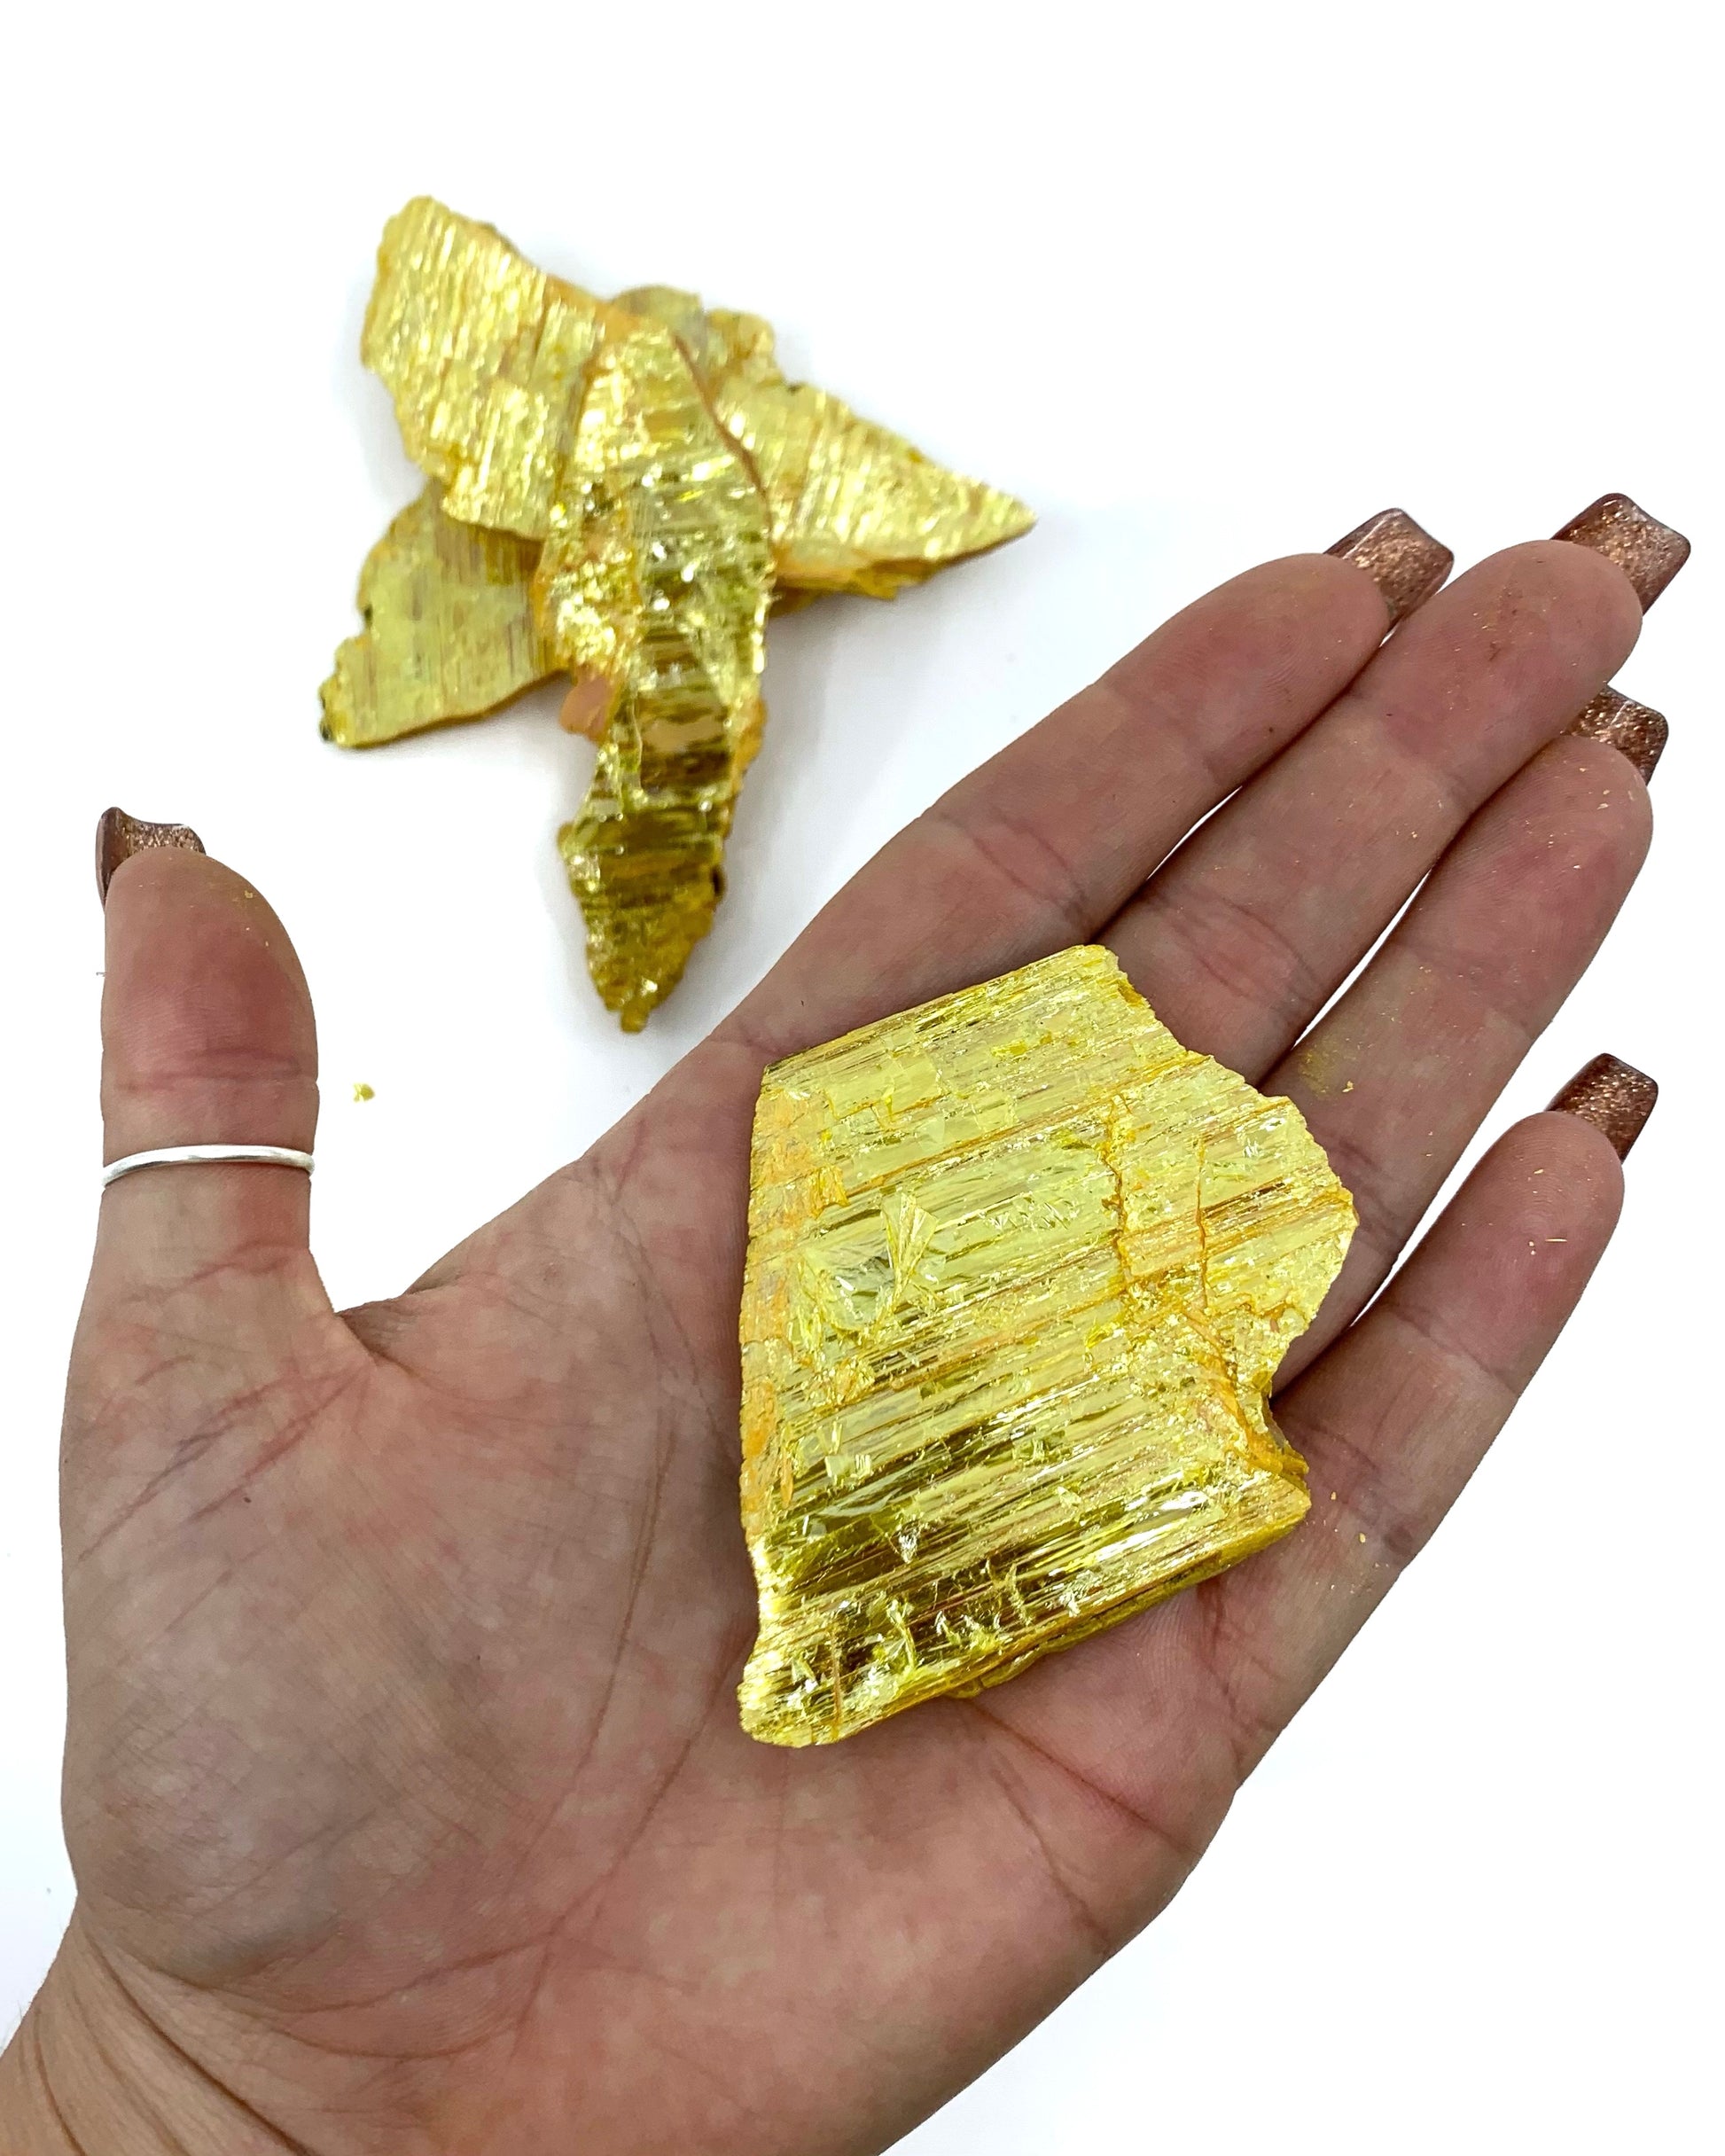 Bright yellow Orpiment mineral. Sizes roughly measuring 3 inches and above